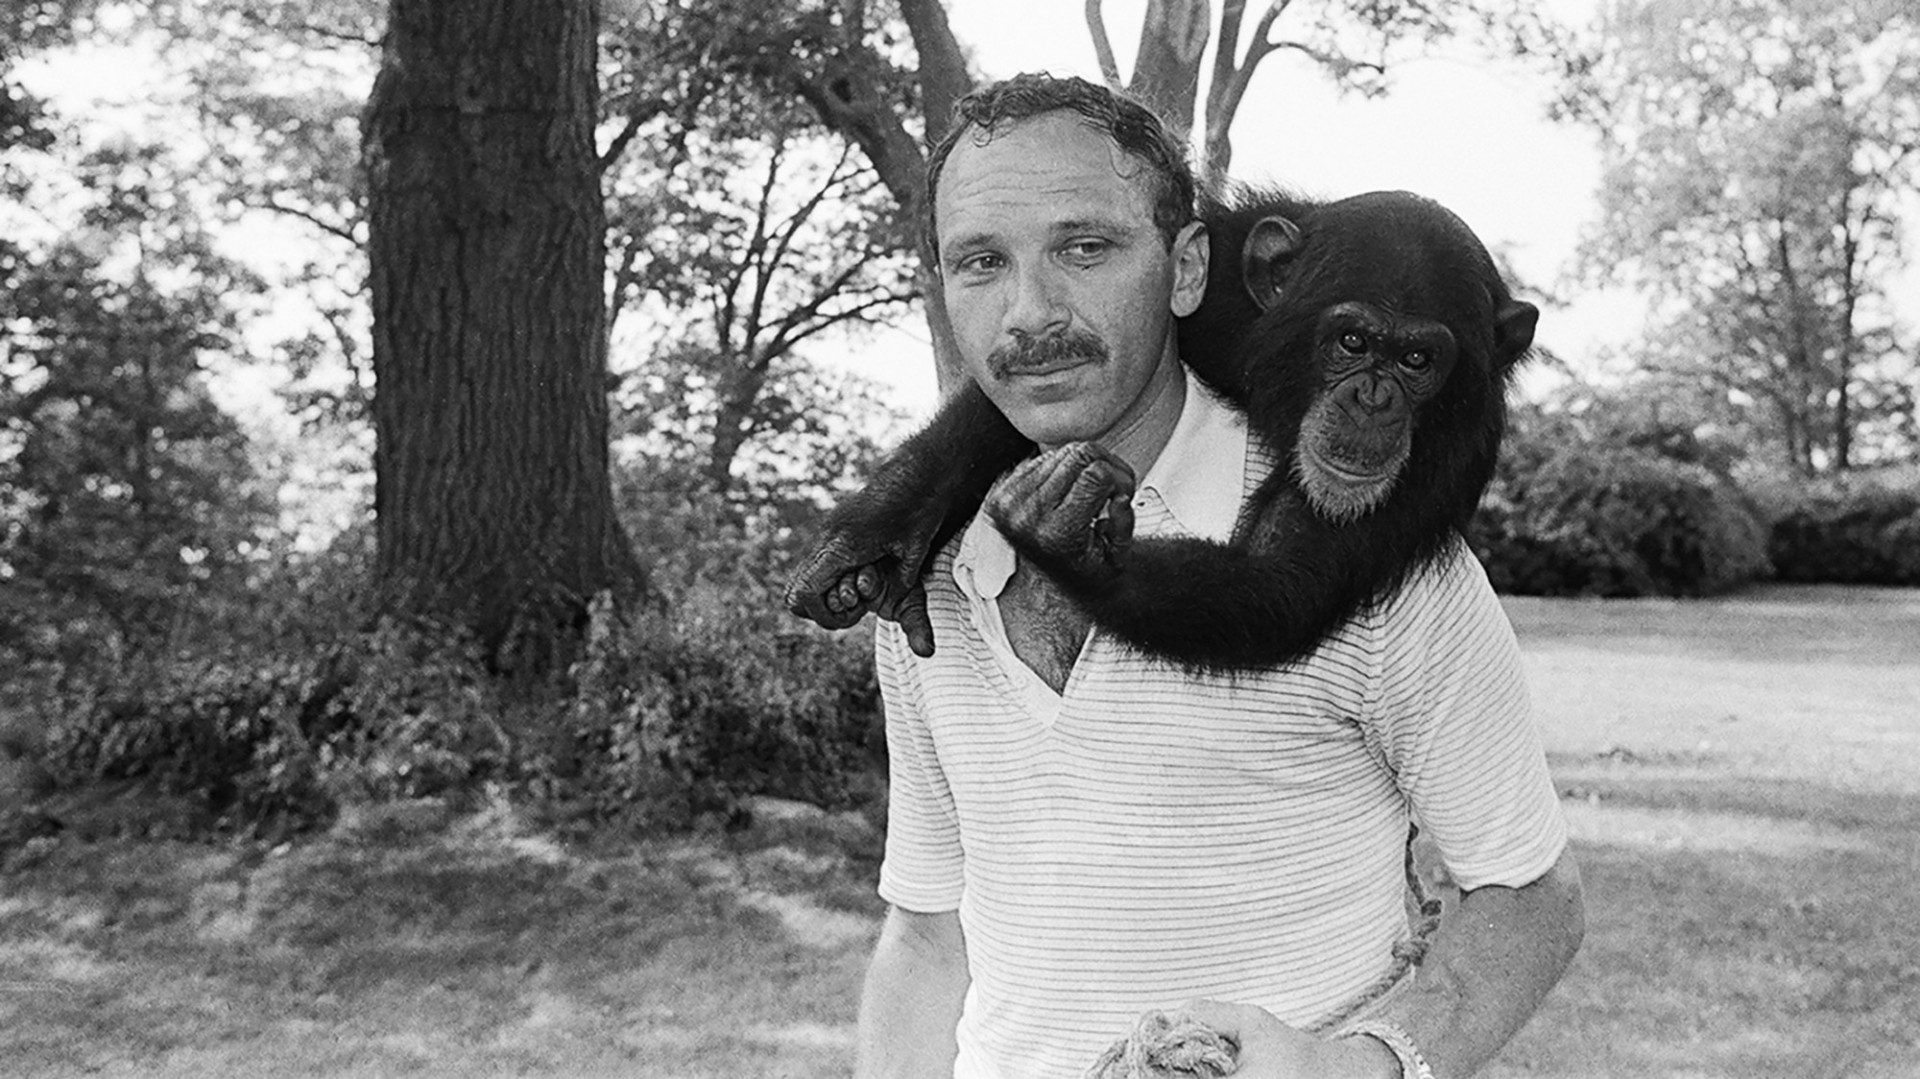 black and white image of young man with mustache carrying a chimp on his back